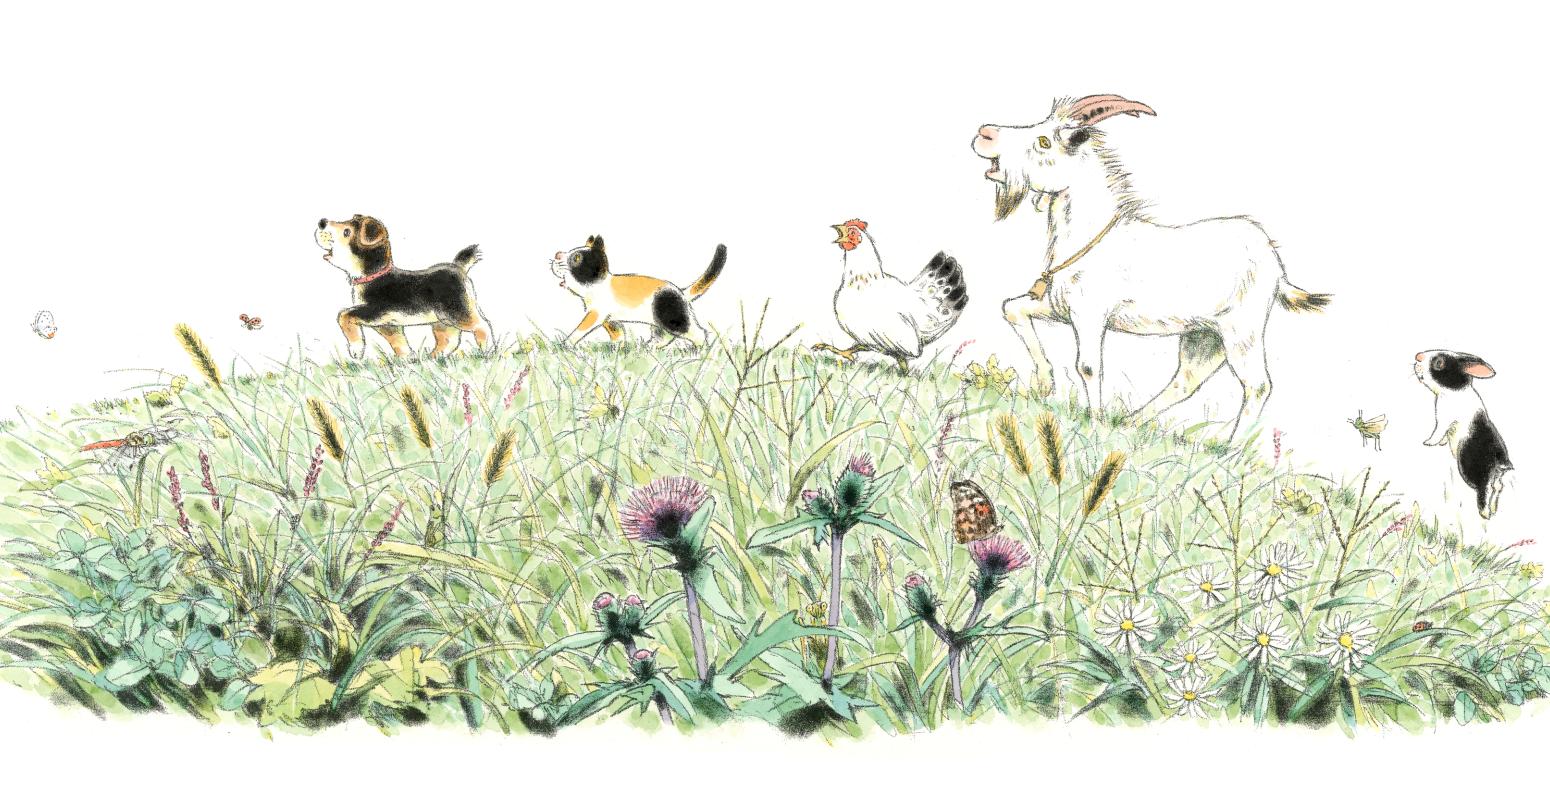 Illustration of dog, cat, rooster, goat, and cat walking on flowery hill. 